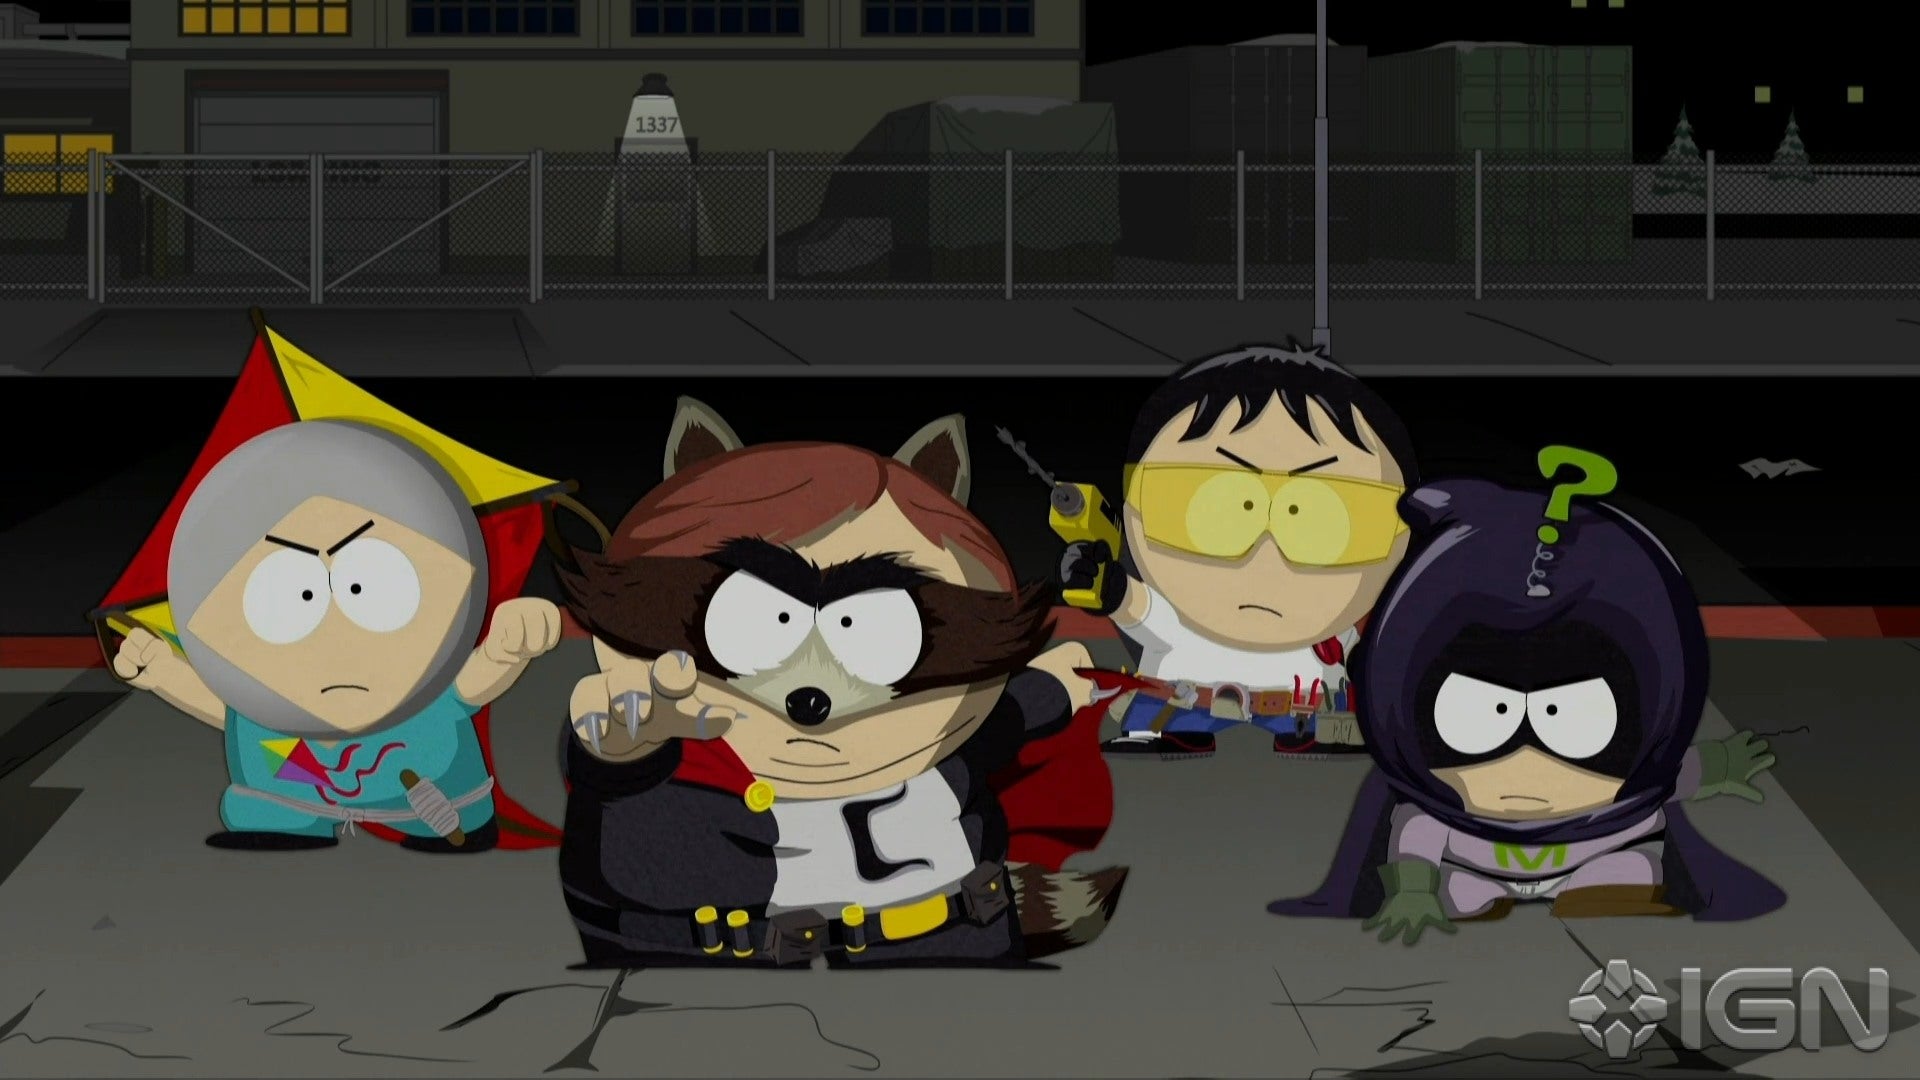 South-park-the-fractured-but-whole-e3-2015-screenshot1.jpg